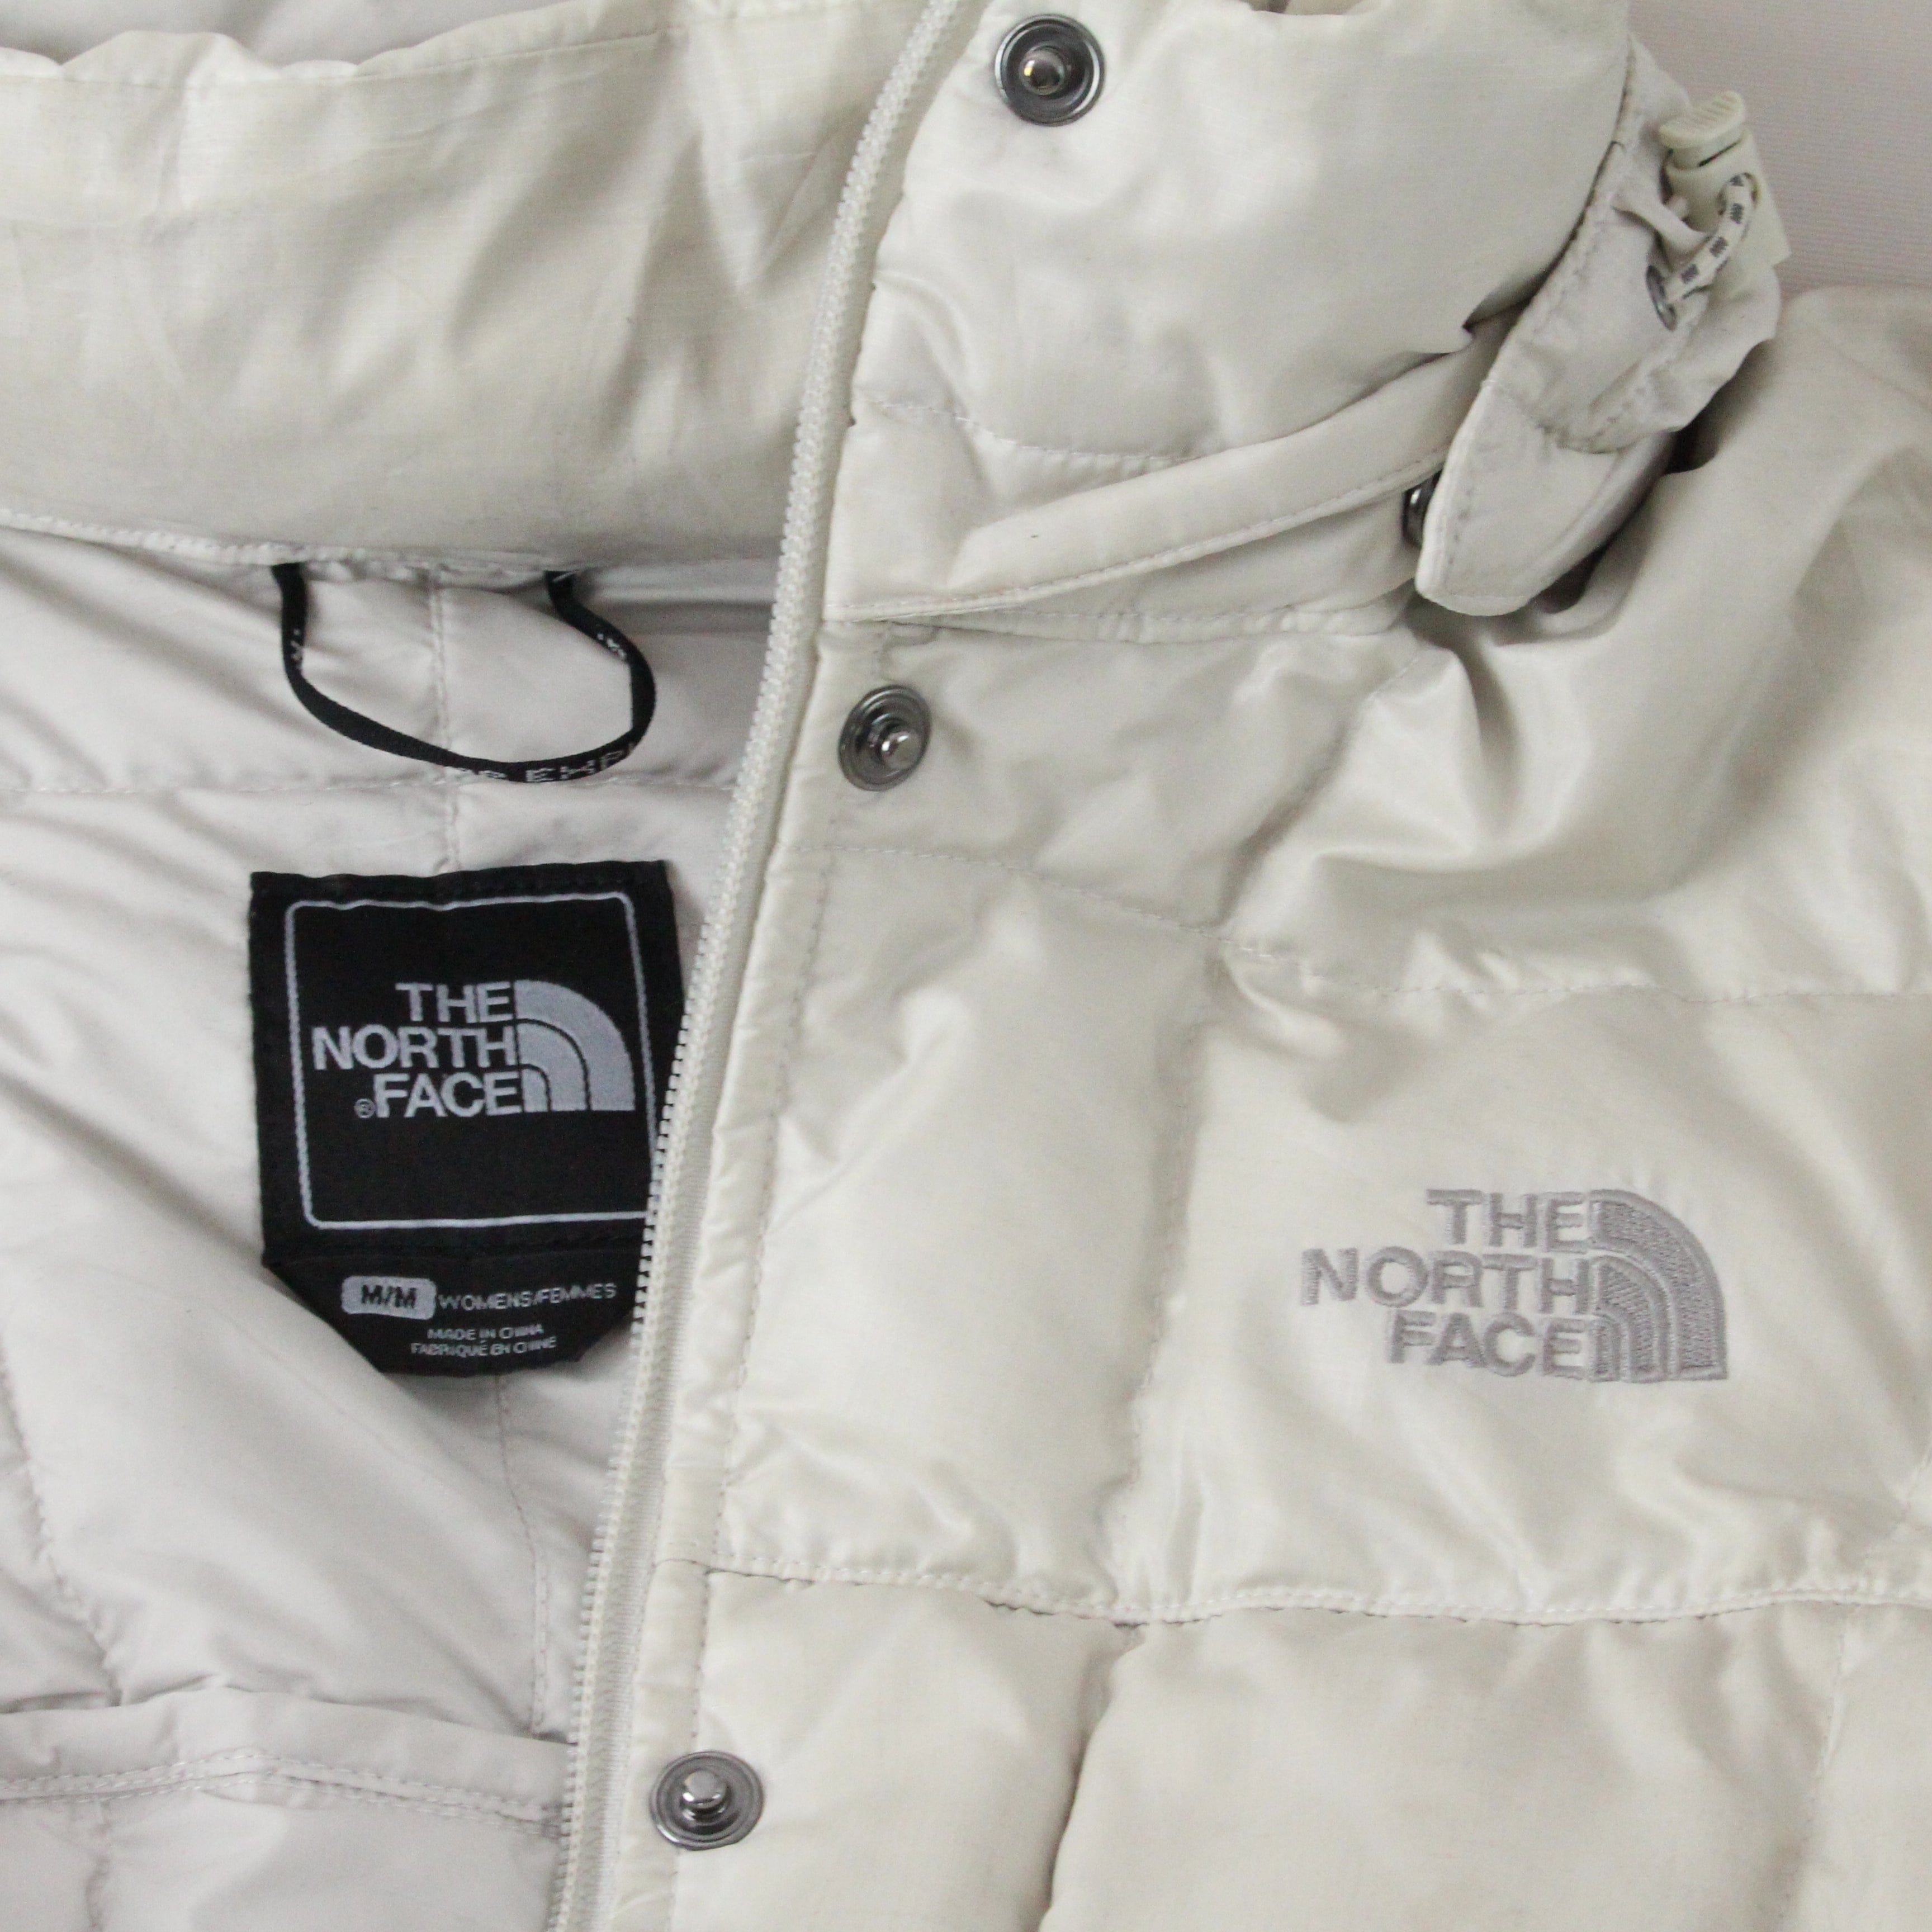 The North Face 500 Down Jacket Women's Size Medium